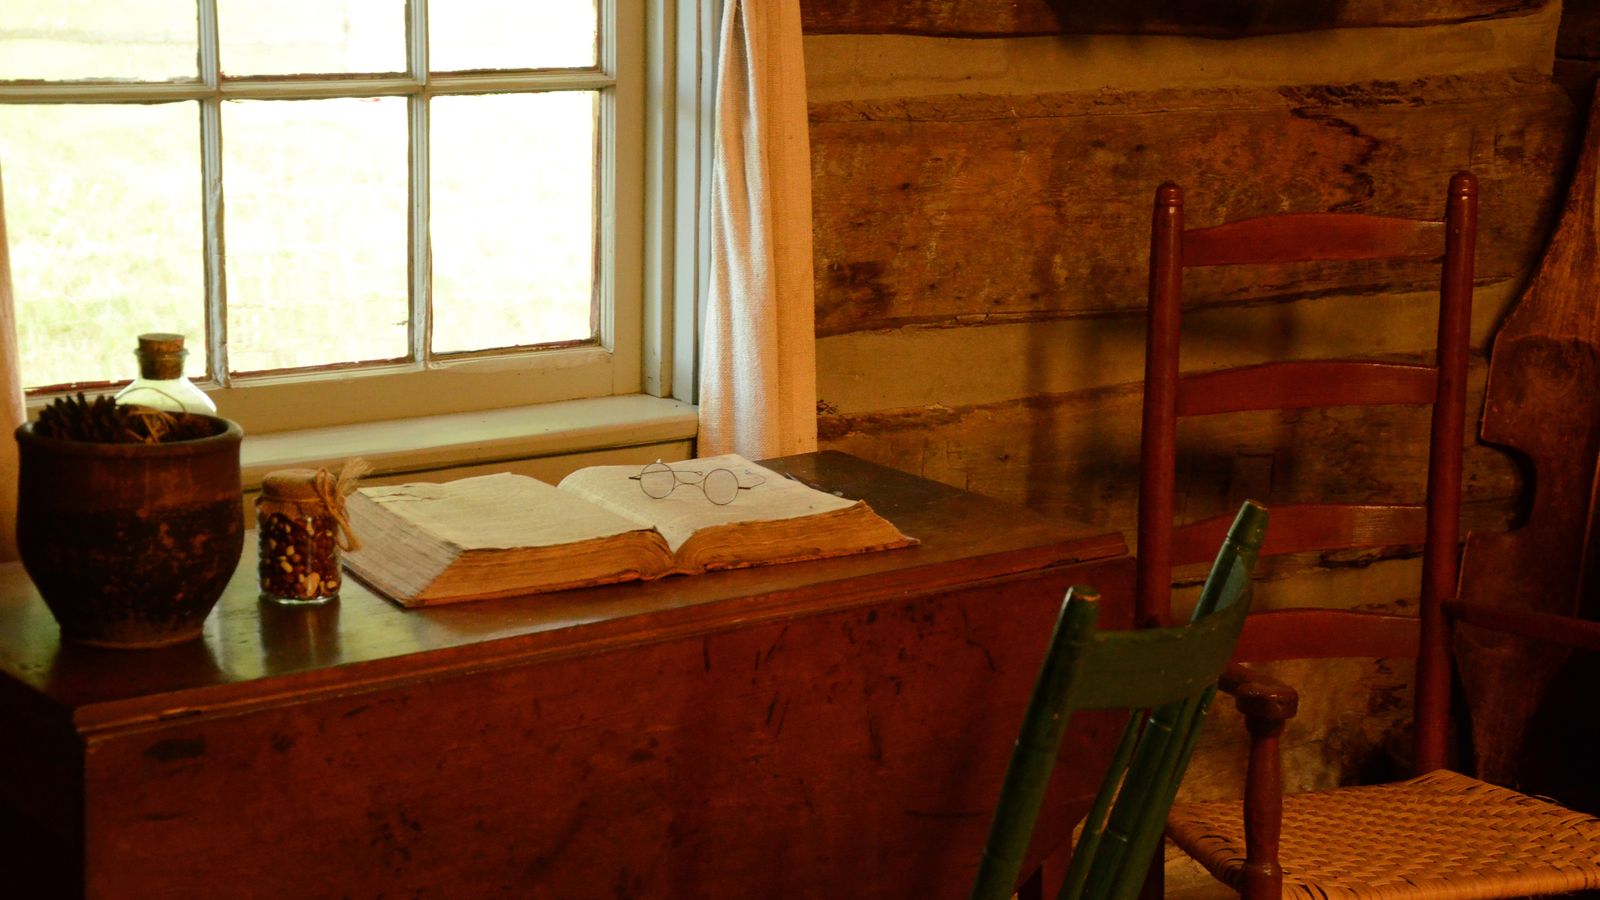 Interior of log home at Peter Whitmer cabin and farm with desk, scriptures, eyeglasses and window.  (horiz)